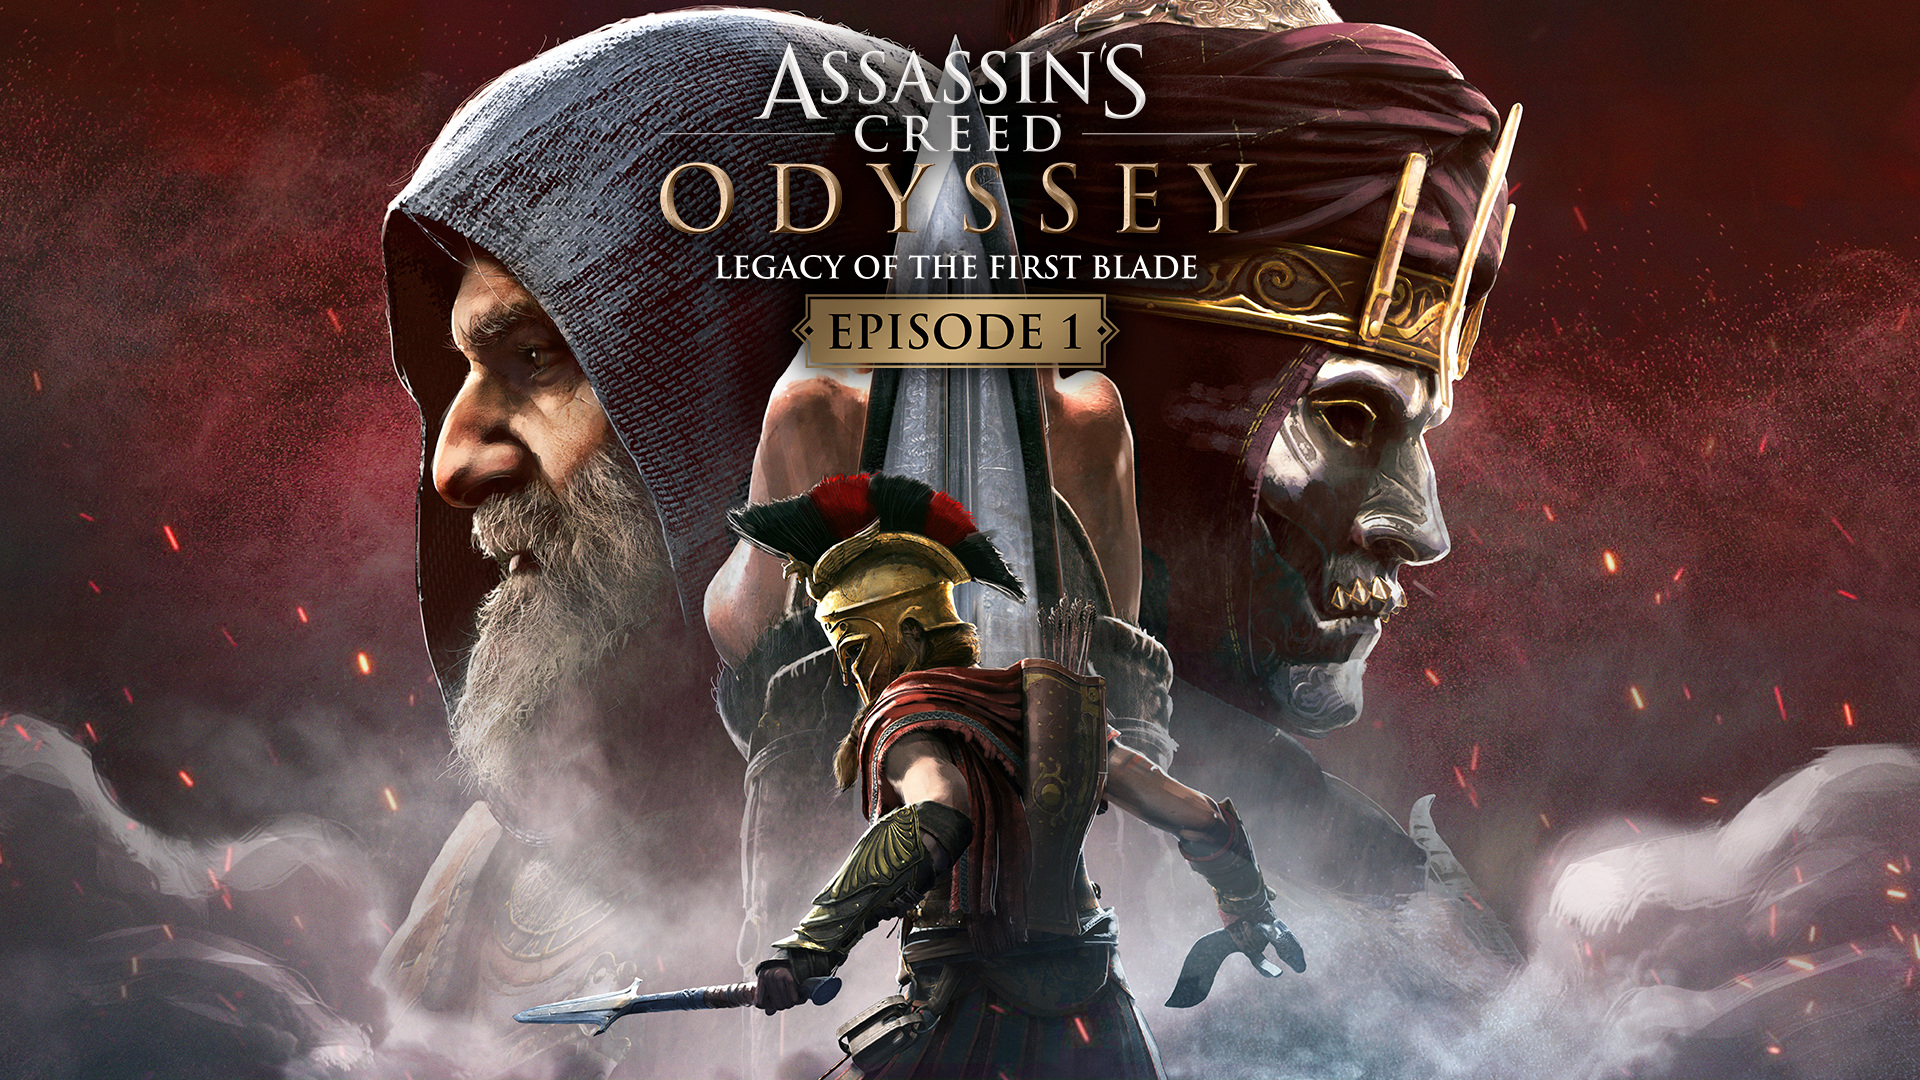 General 1920x1080 Assassin's Creed video games Ubisoft Assassin's Creed: Odyssey